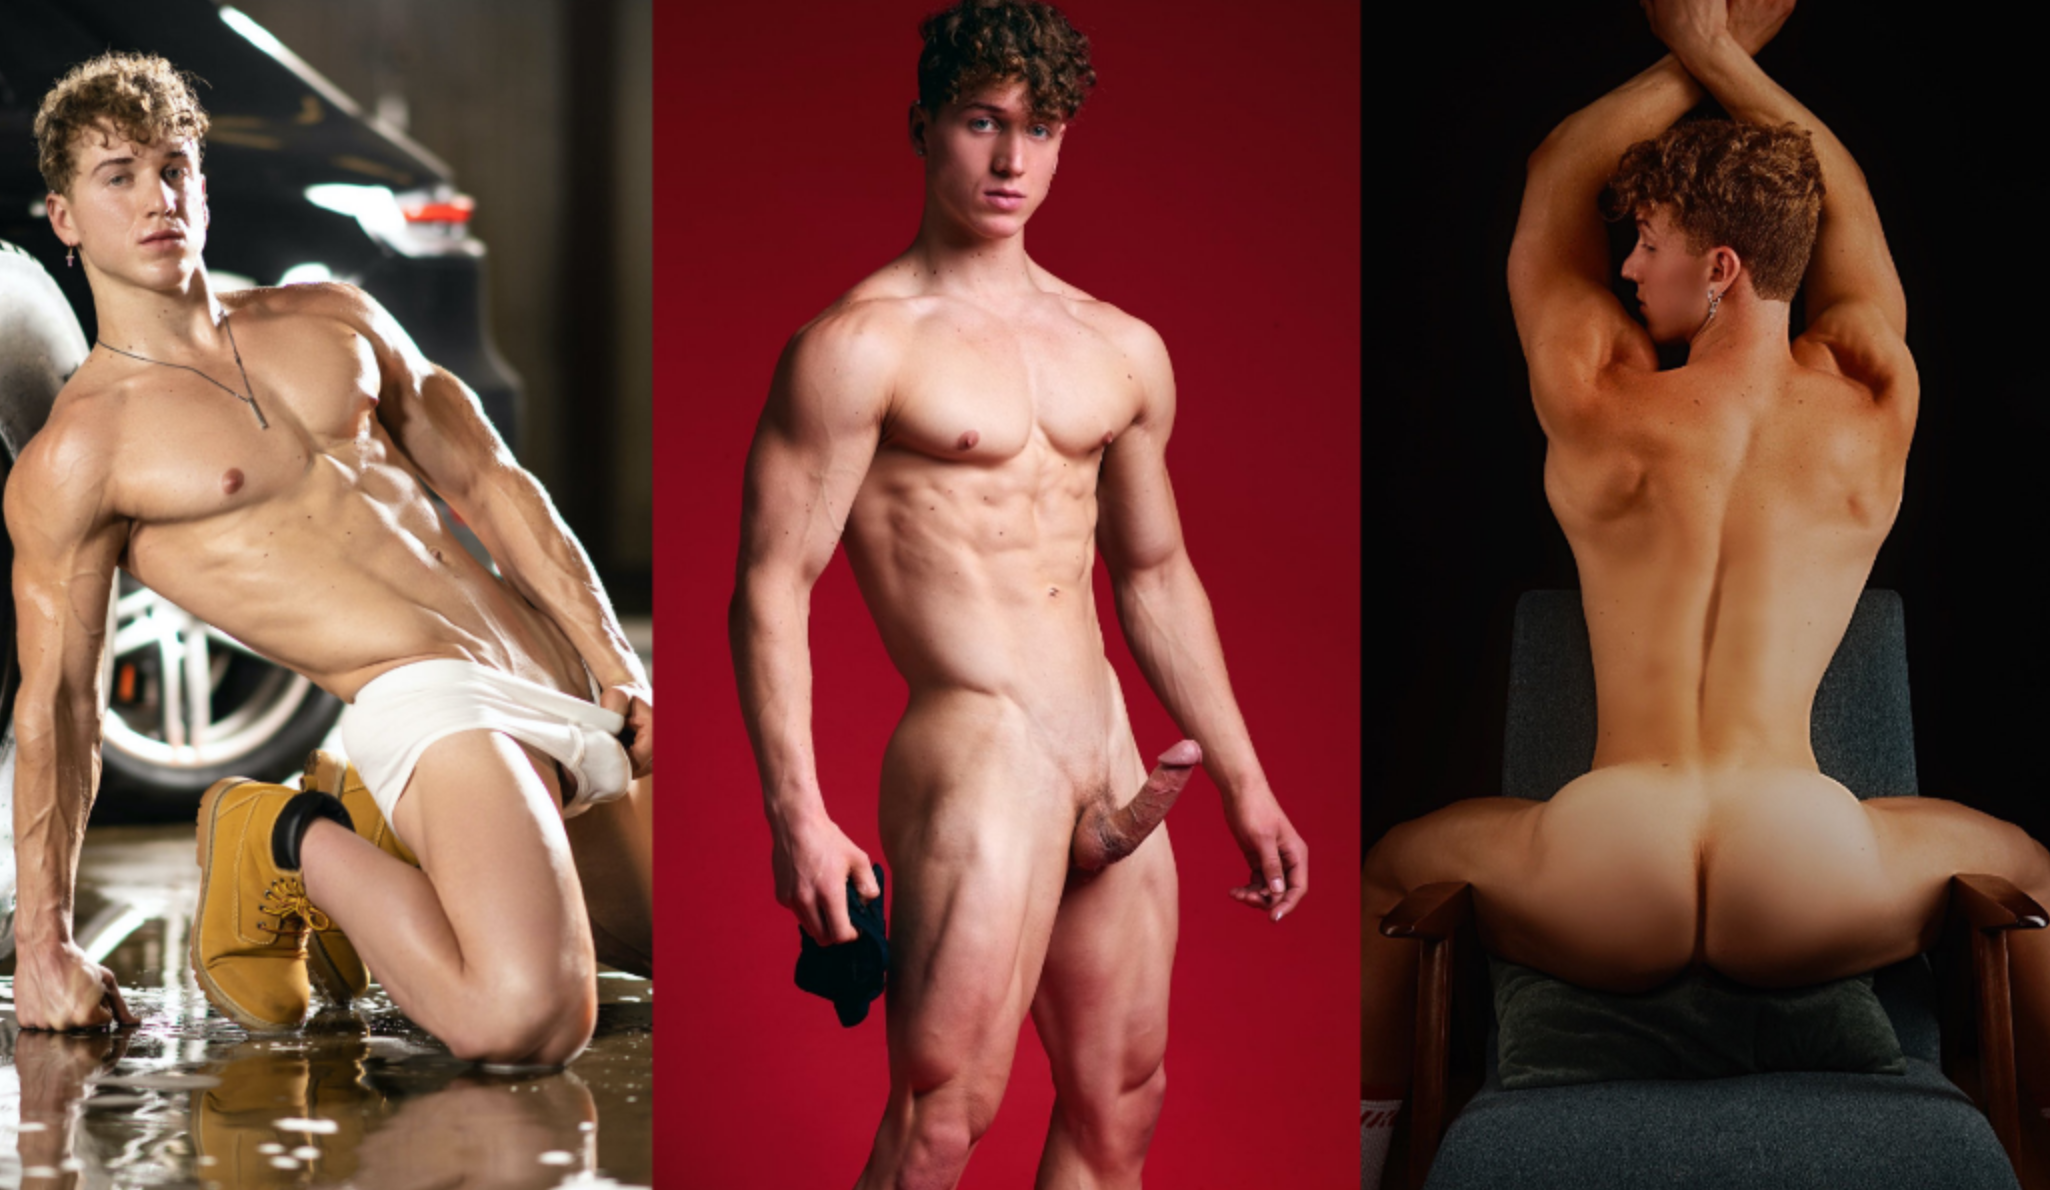 Exclusive: Gay Porn Star Felix Fox On Why He Wants To Meet Fans, Why Rhyhei...